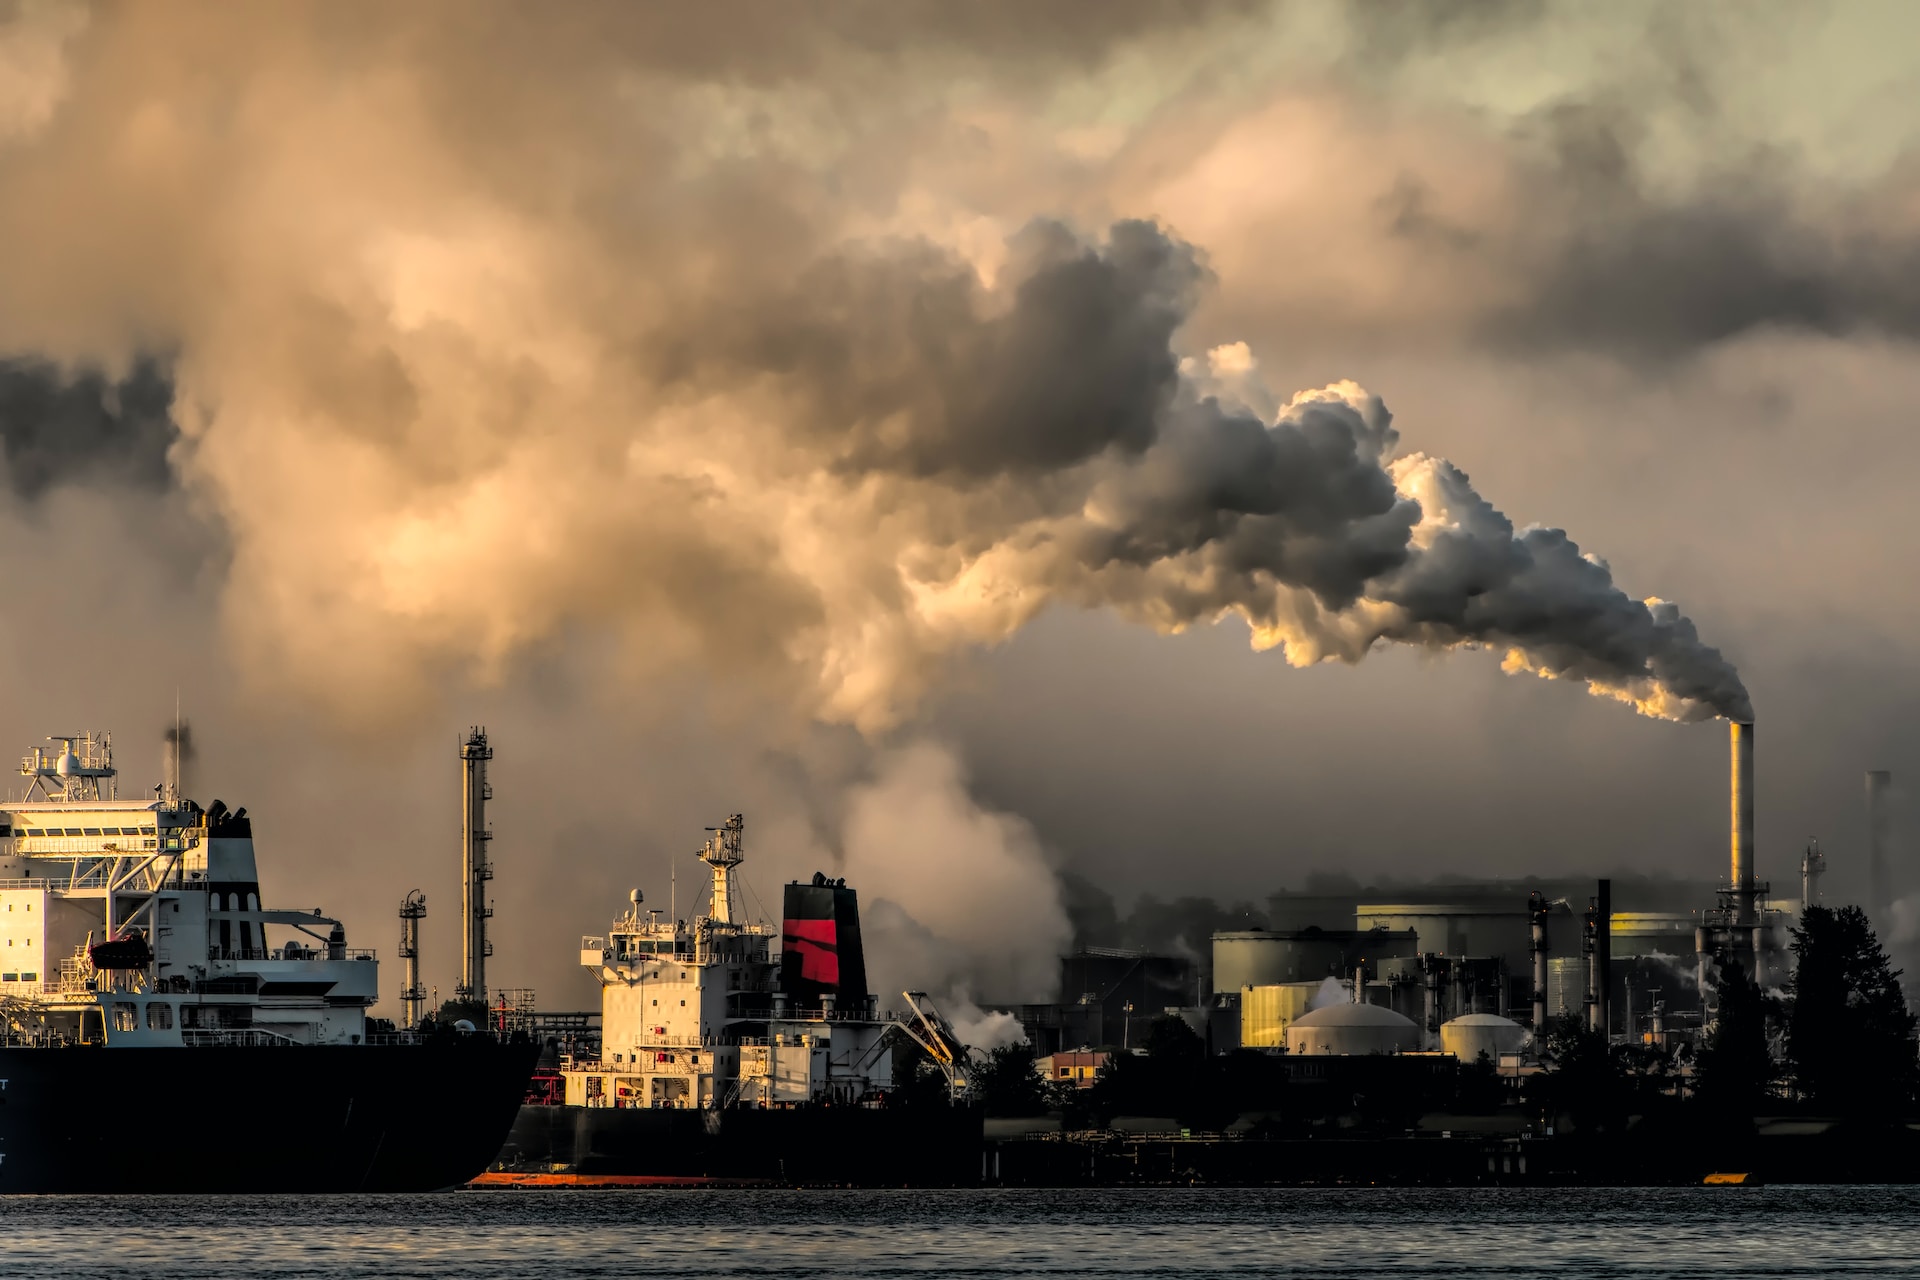 Climate advisors tell EU to revamp its existing policies to phase out fossil fuels